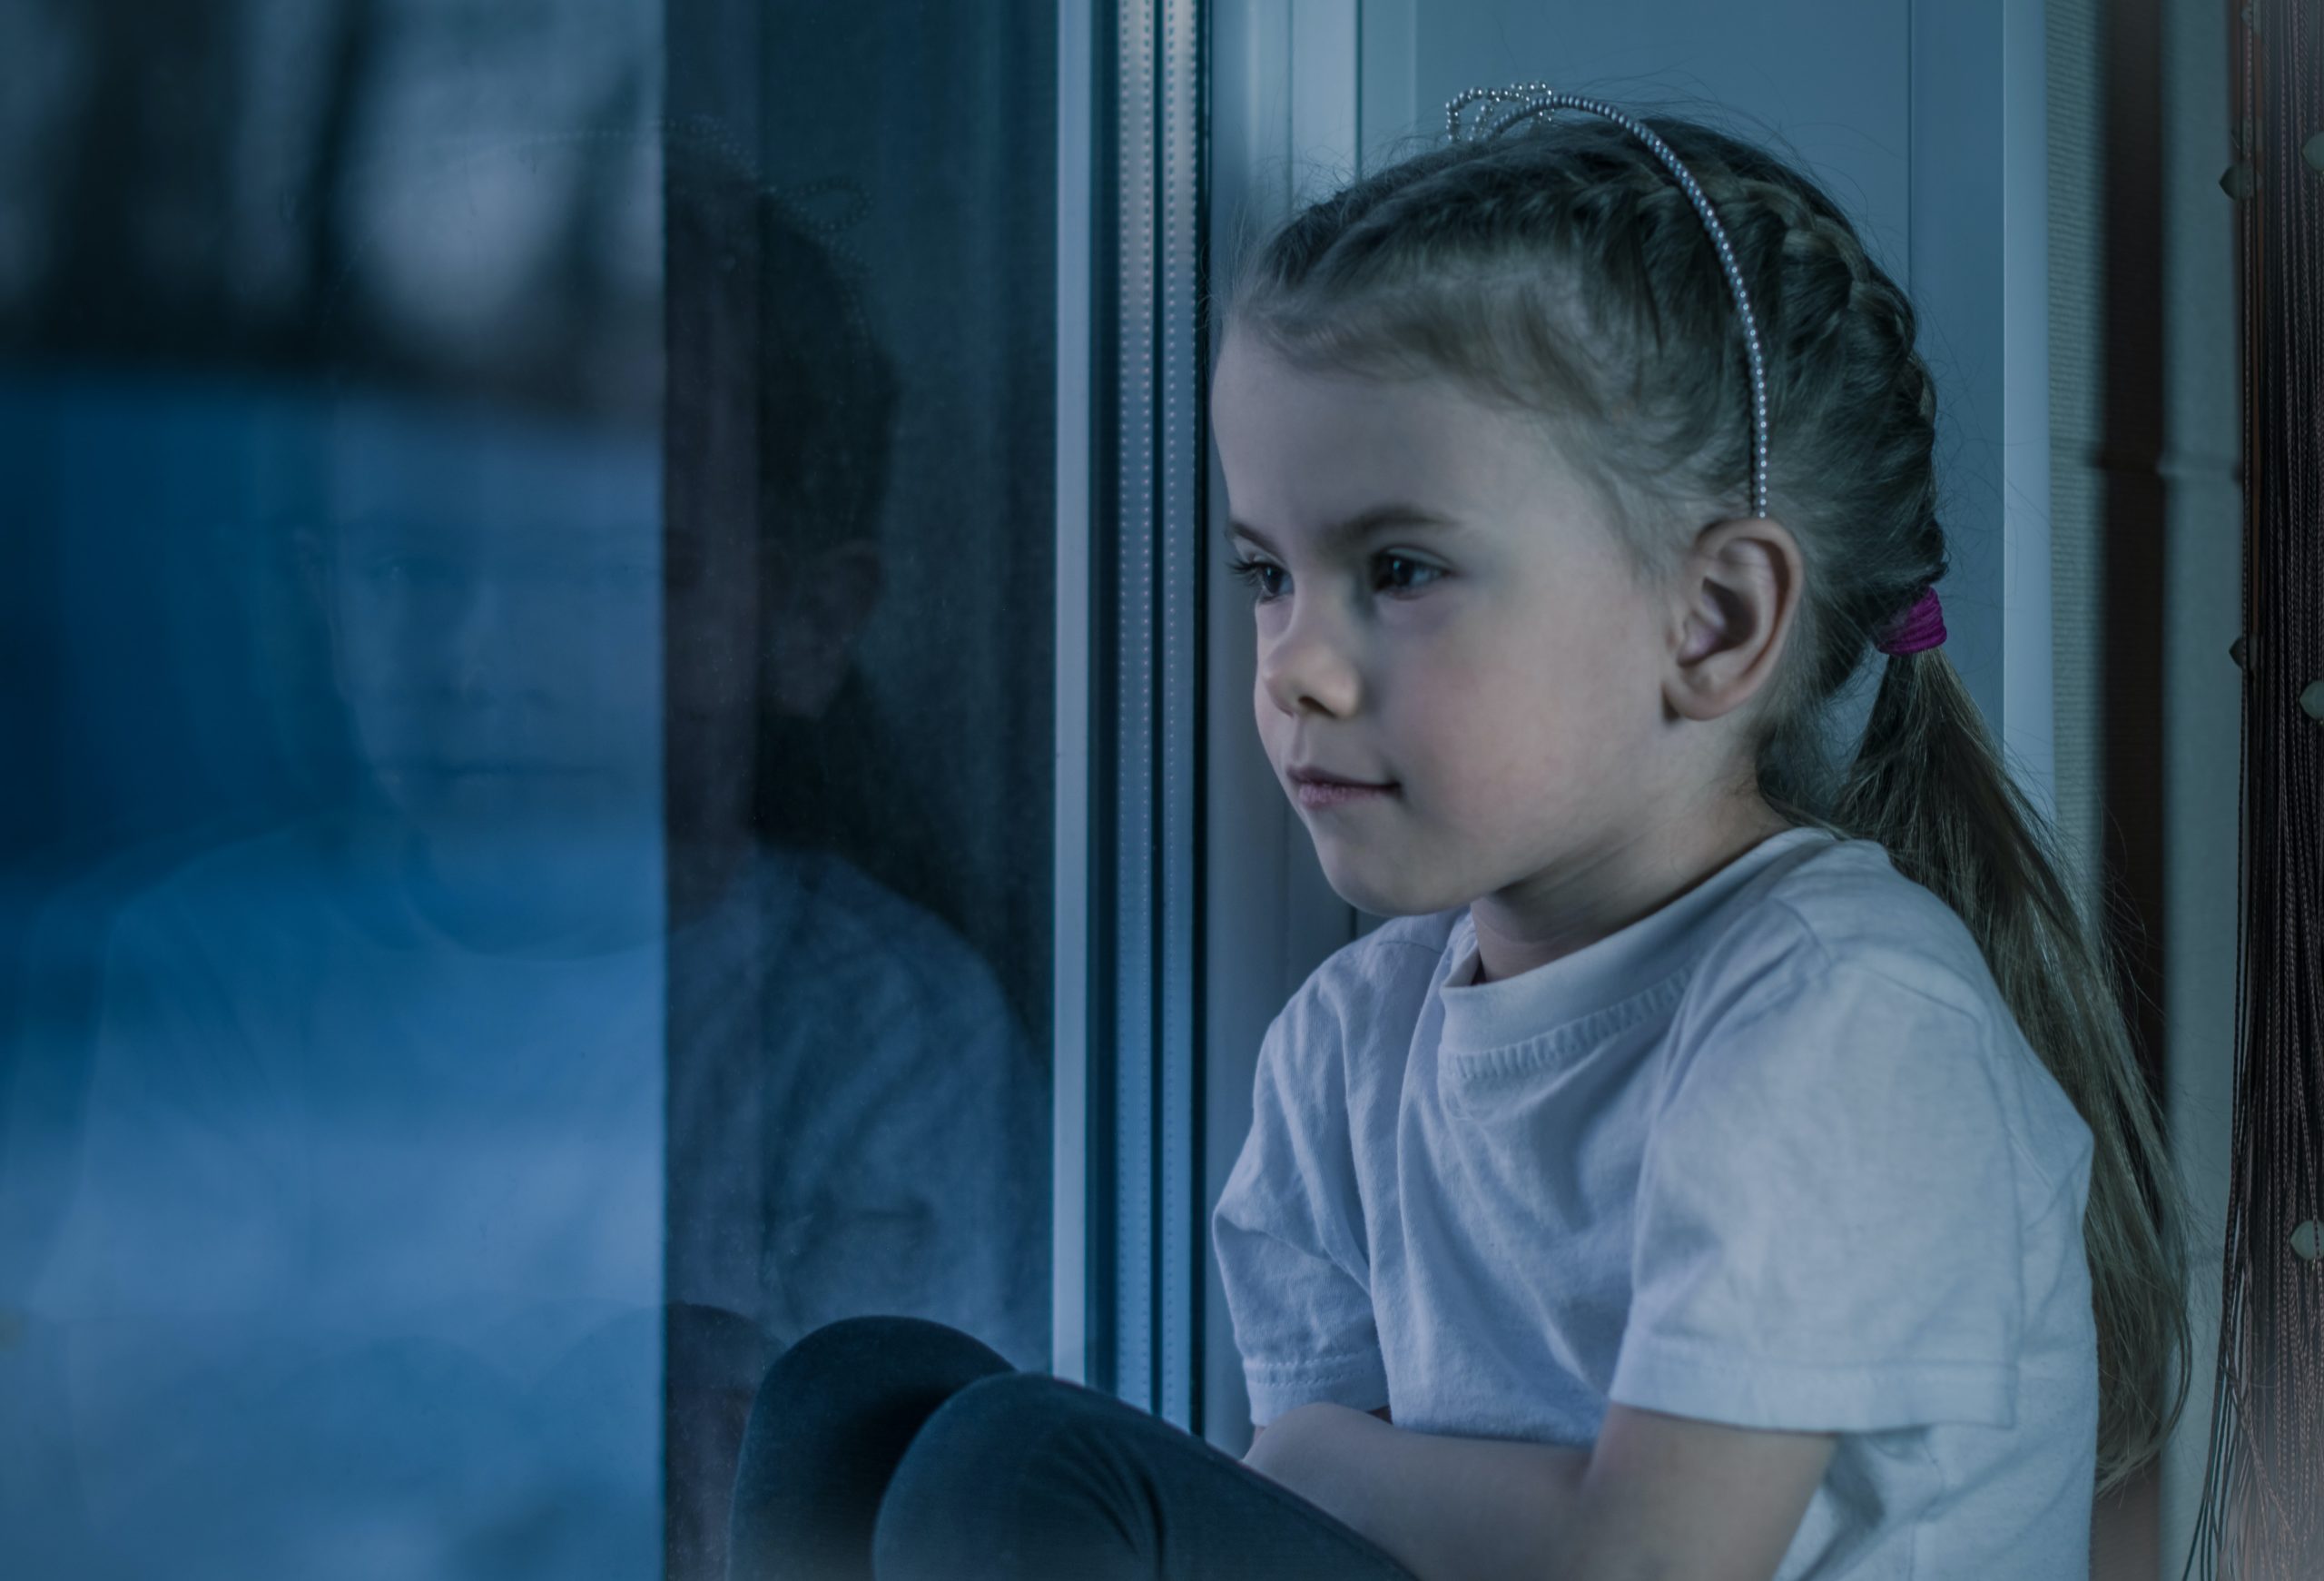 Sad young girl staring out of a window